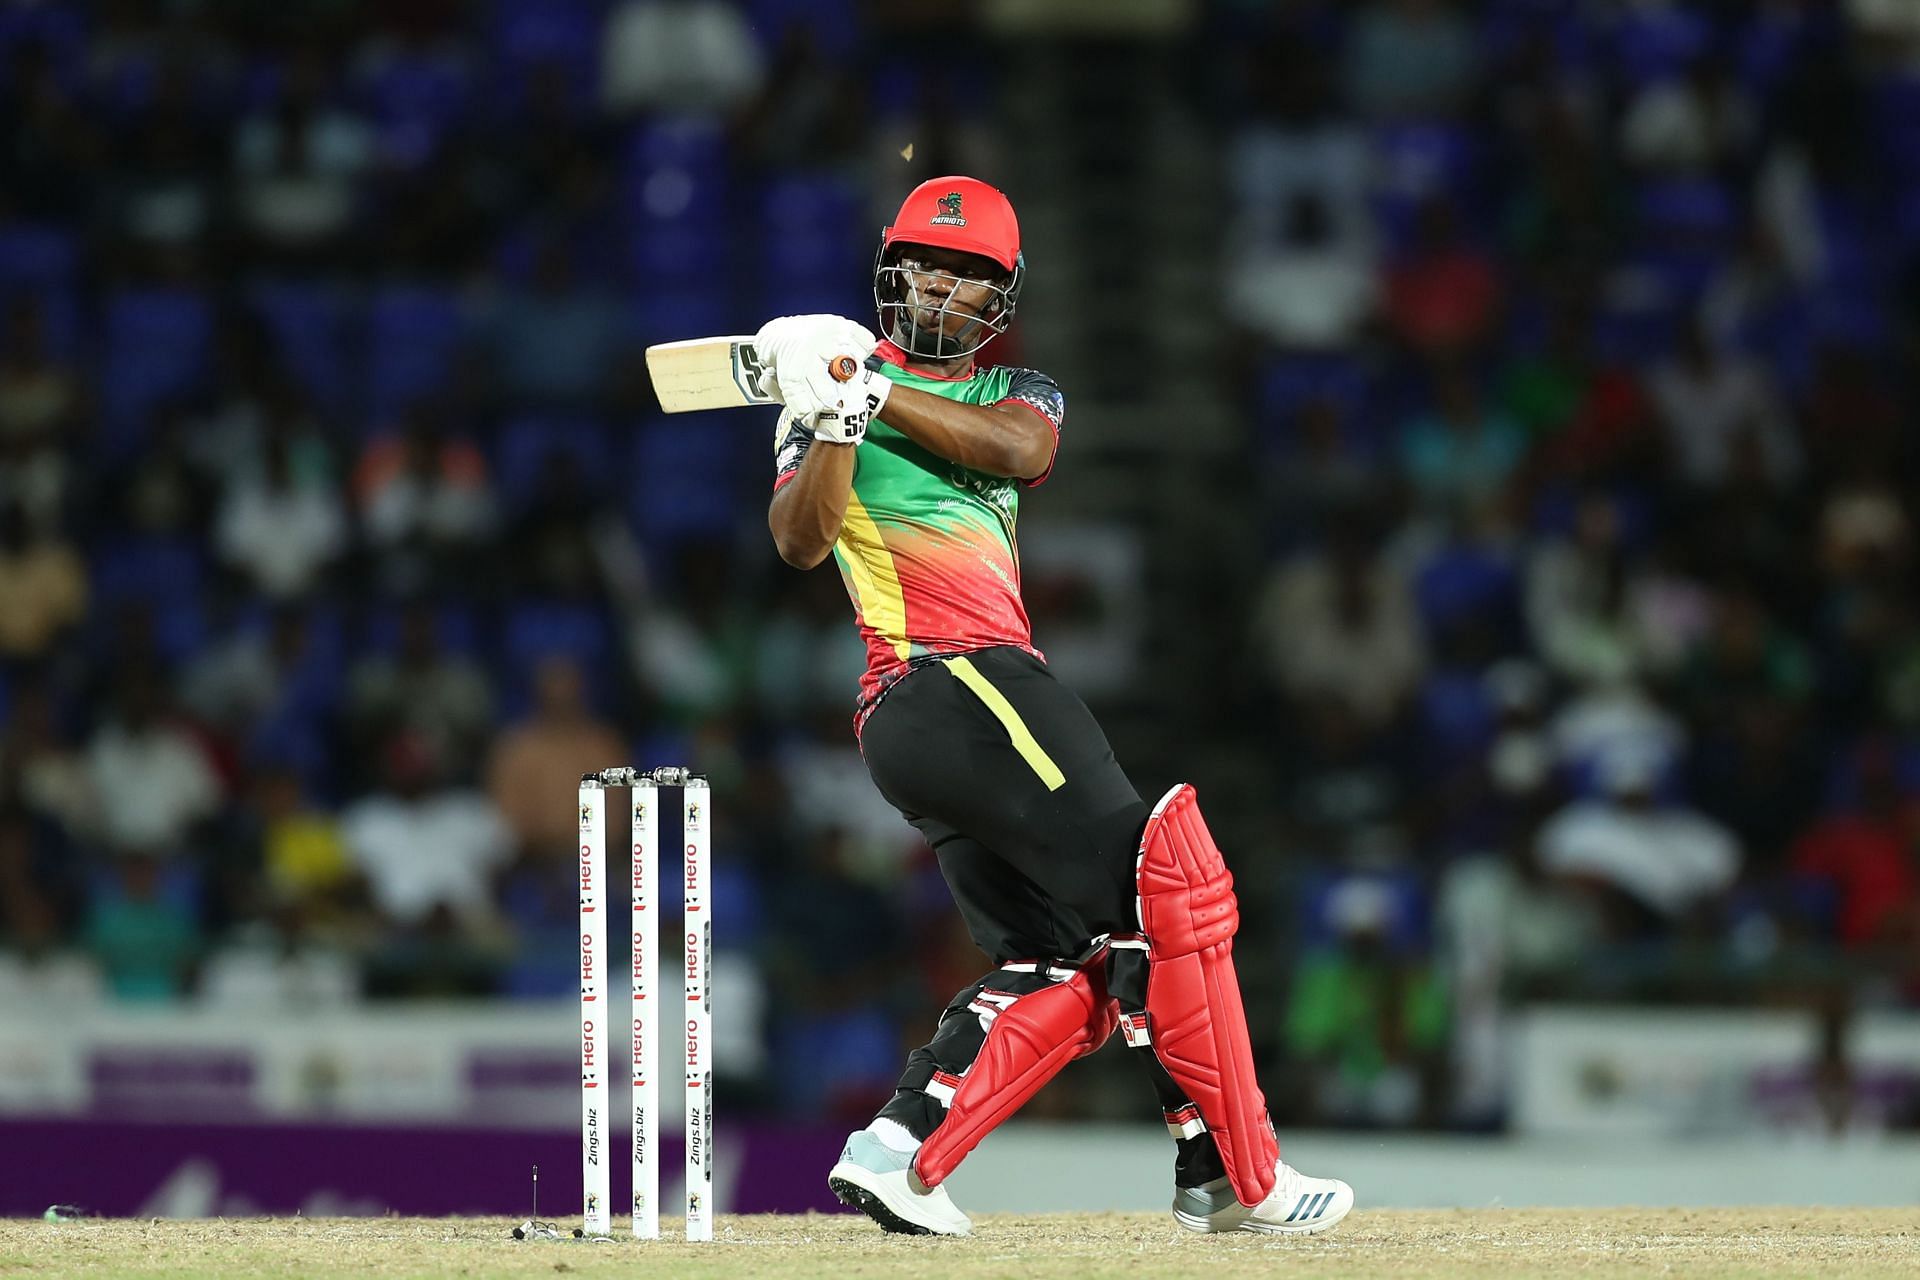 Evin Lewis is a destructive batter who could prove to be key in this game.